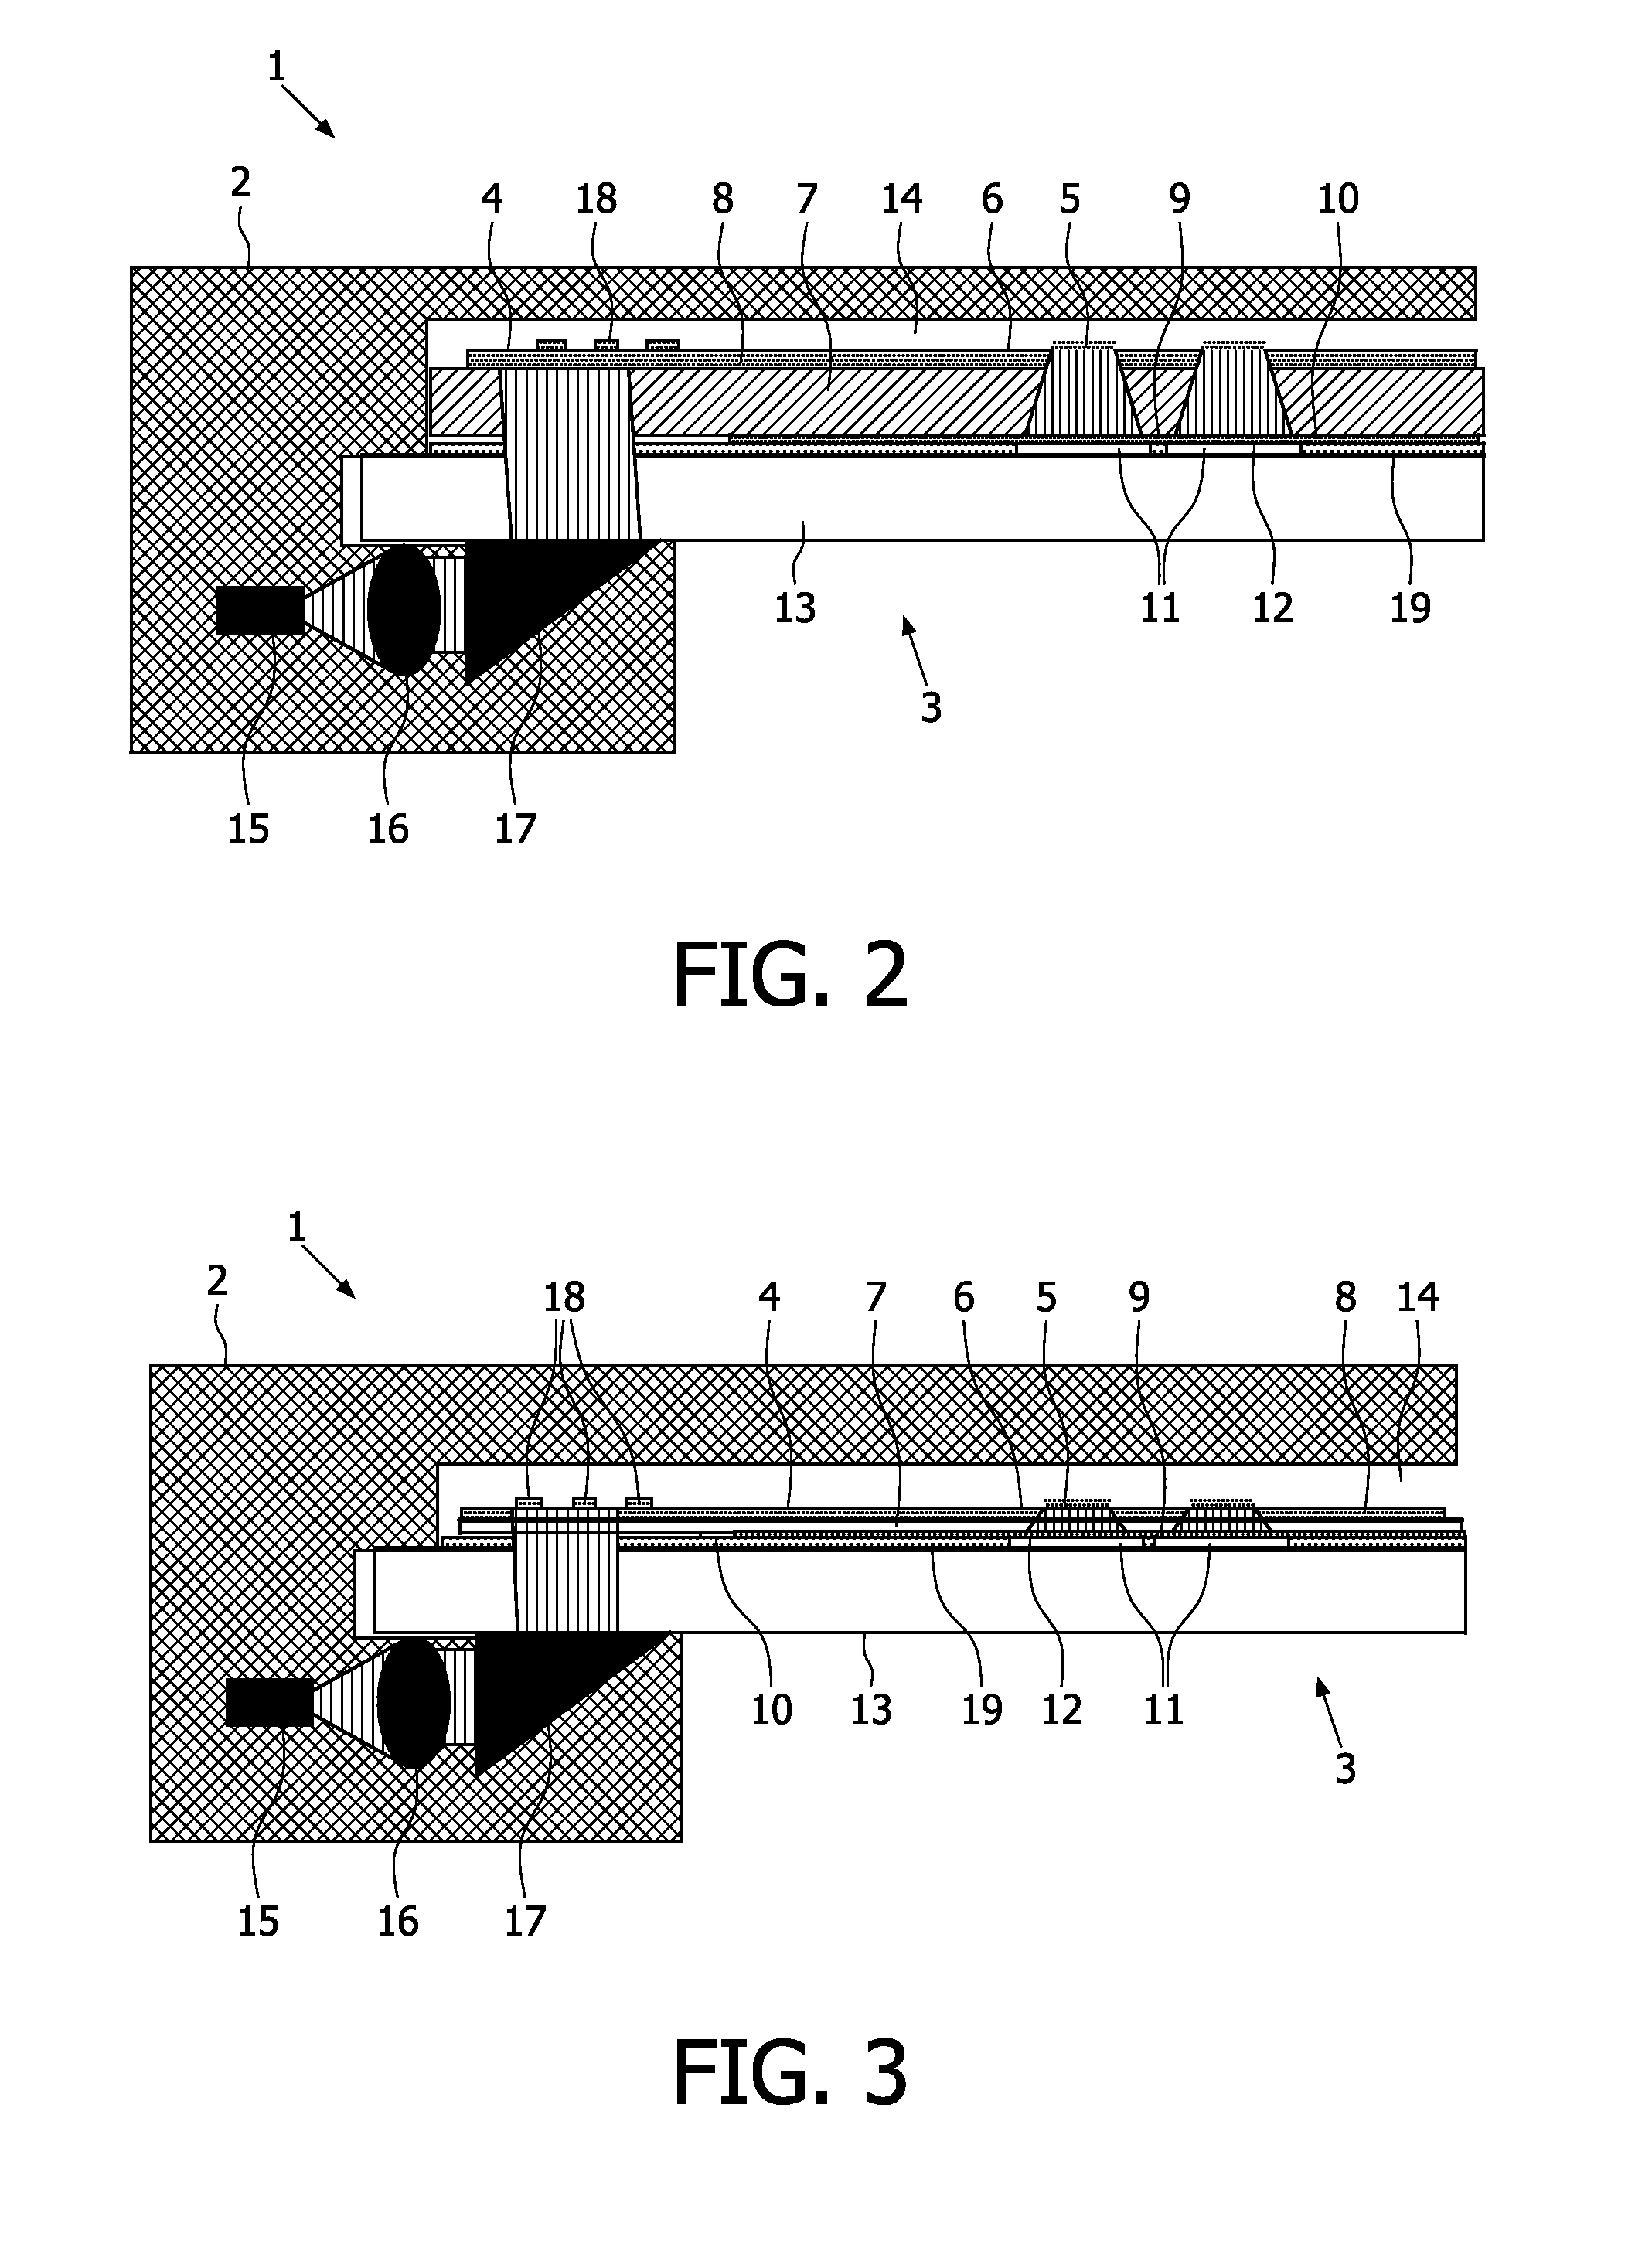 Biosensor with evanescent waveguide and integrated sensor